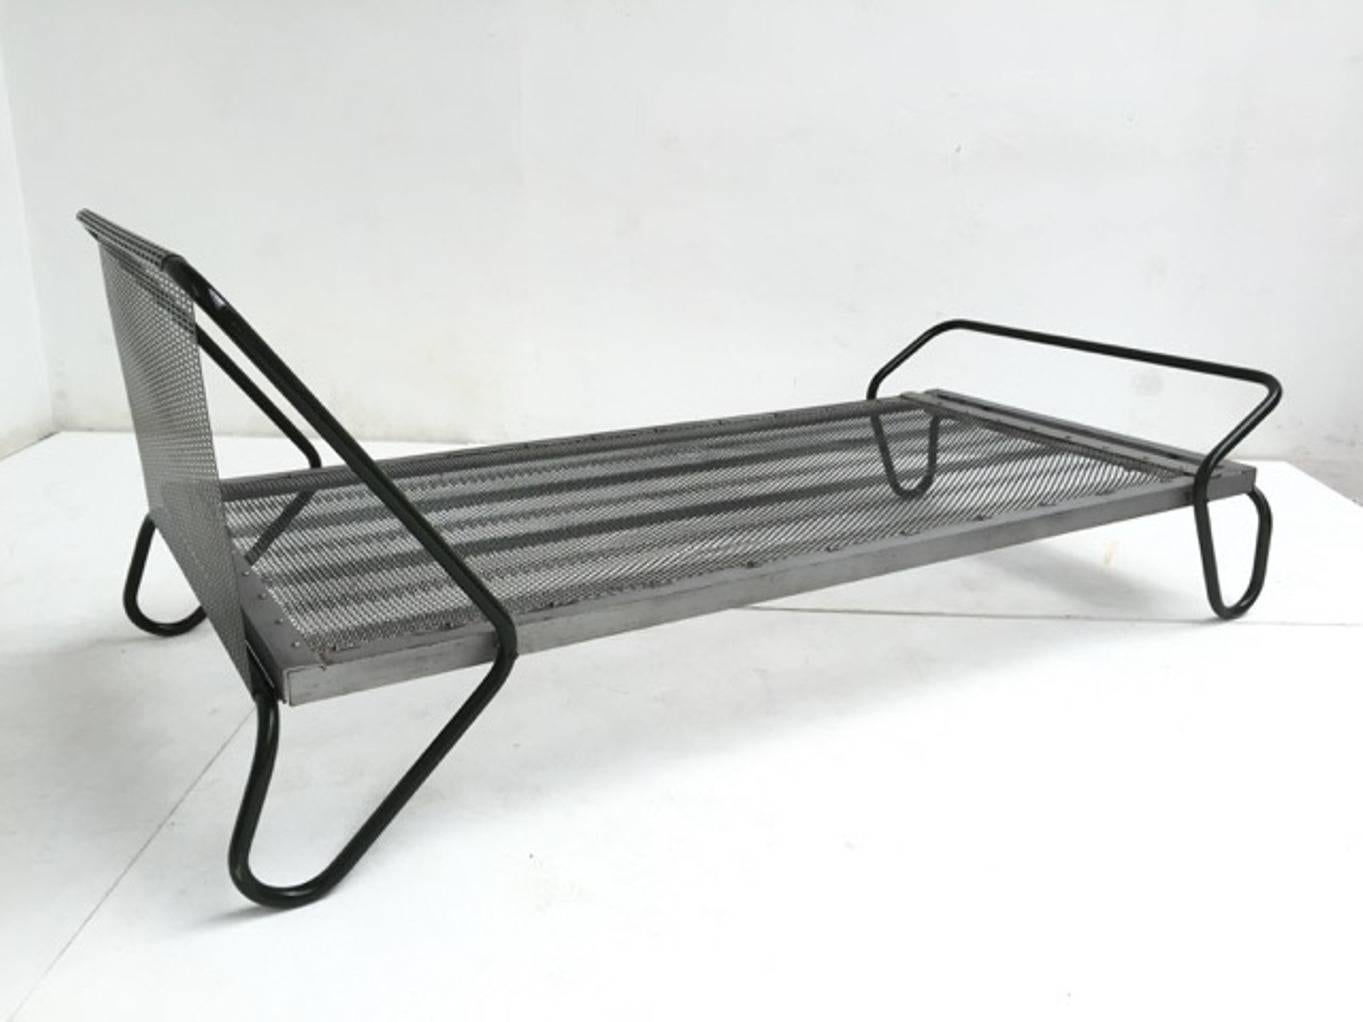 Fabric 1952 'Miami' Daybed by Jacques Hitier for the Famous 'Antony' Building, Paris